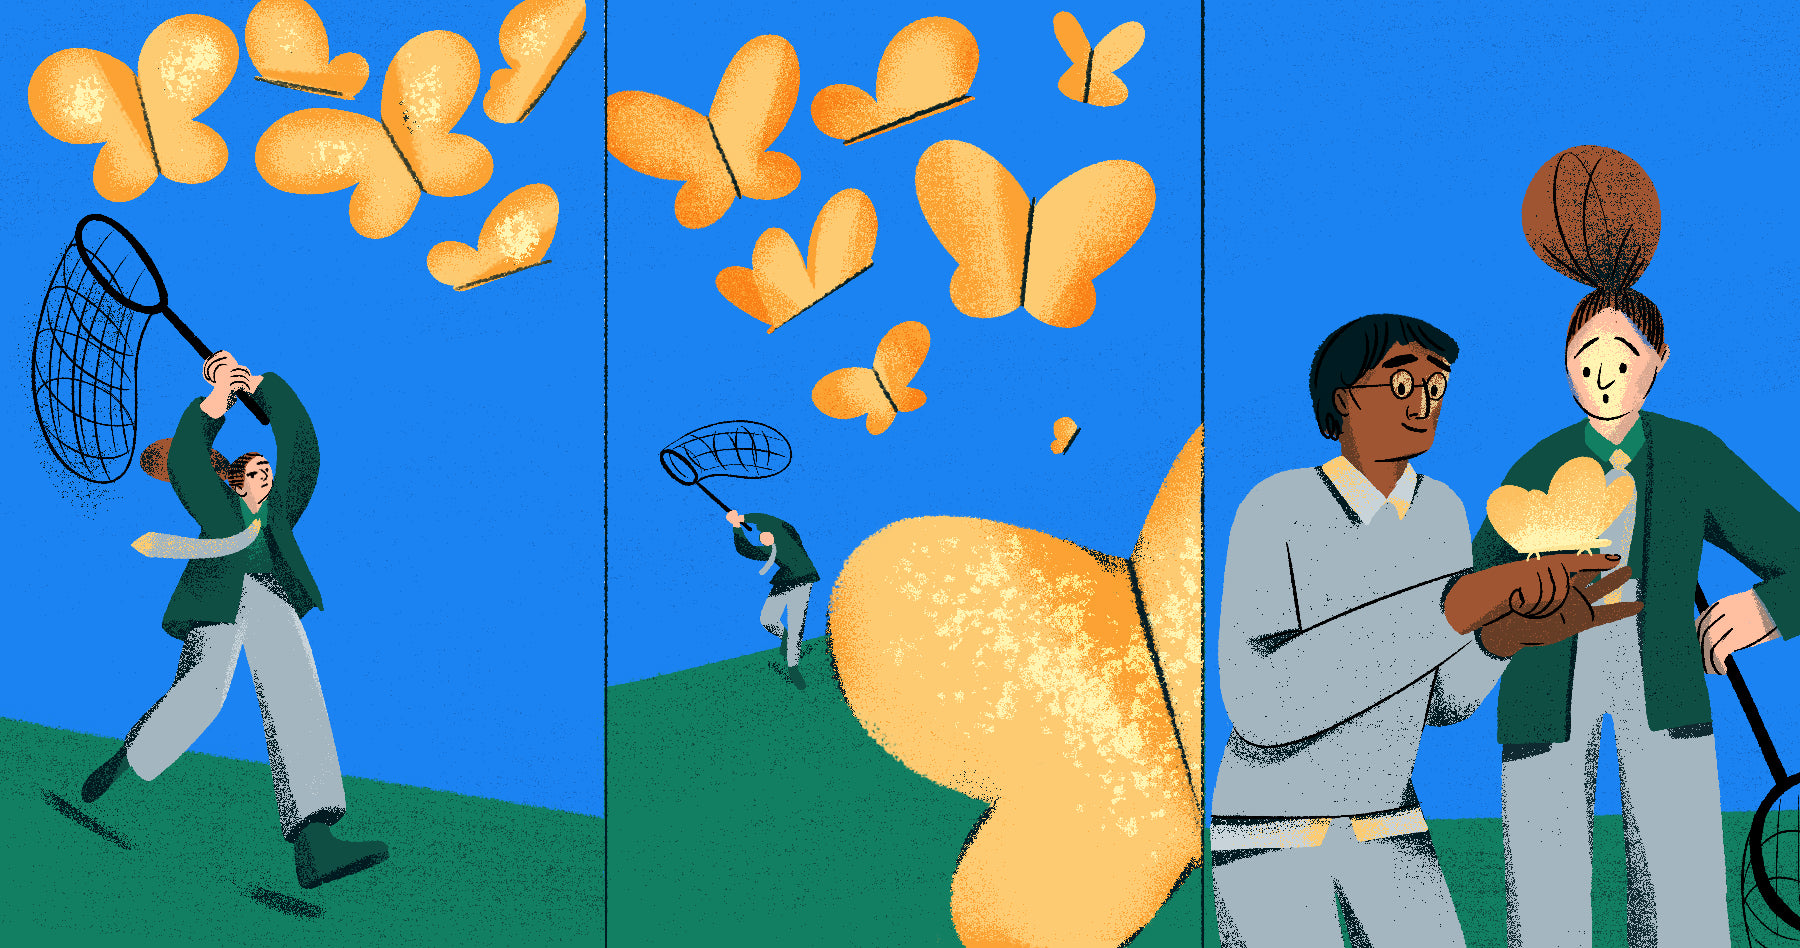 Illustration of a young woman in a sequence of frames that show her trying to catch a butterfly. In the last frame we see a man whose caught one and is showing it to the young woman. The butterflies are a metaphor for deciding which business idea to start.